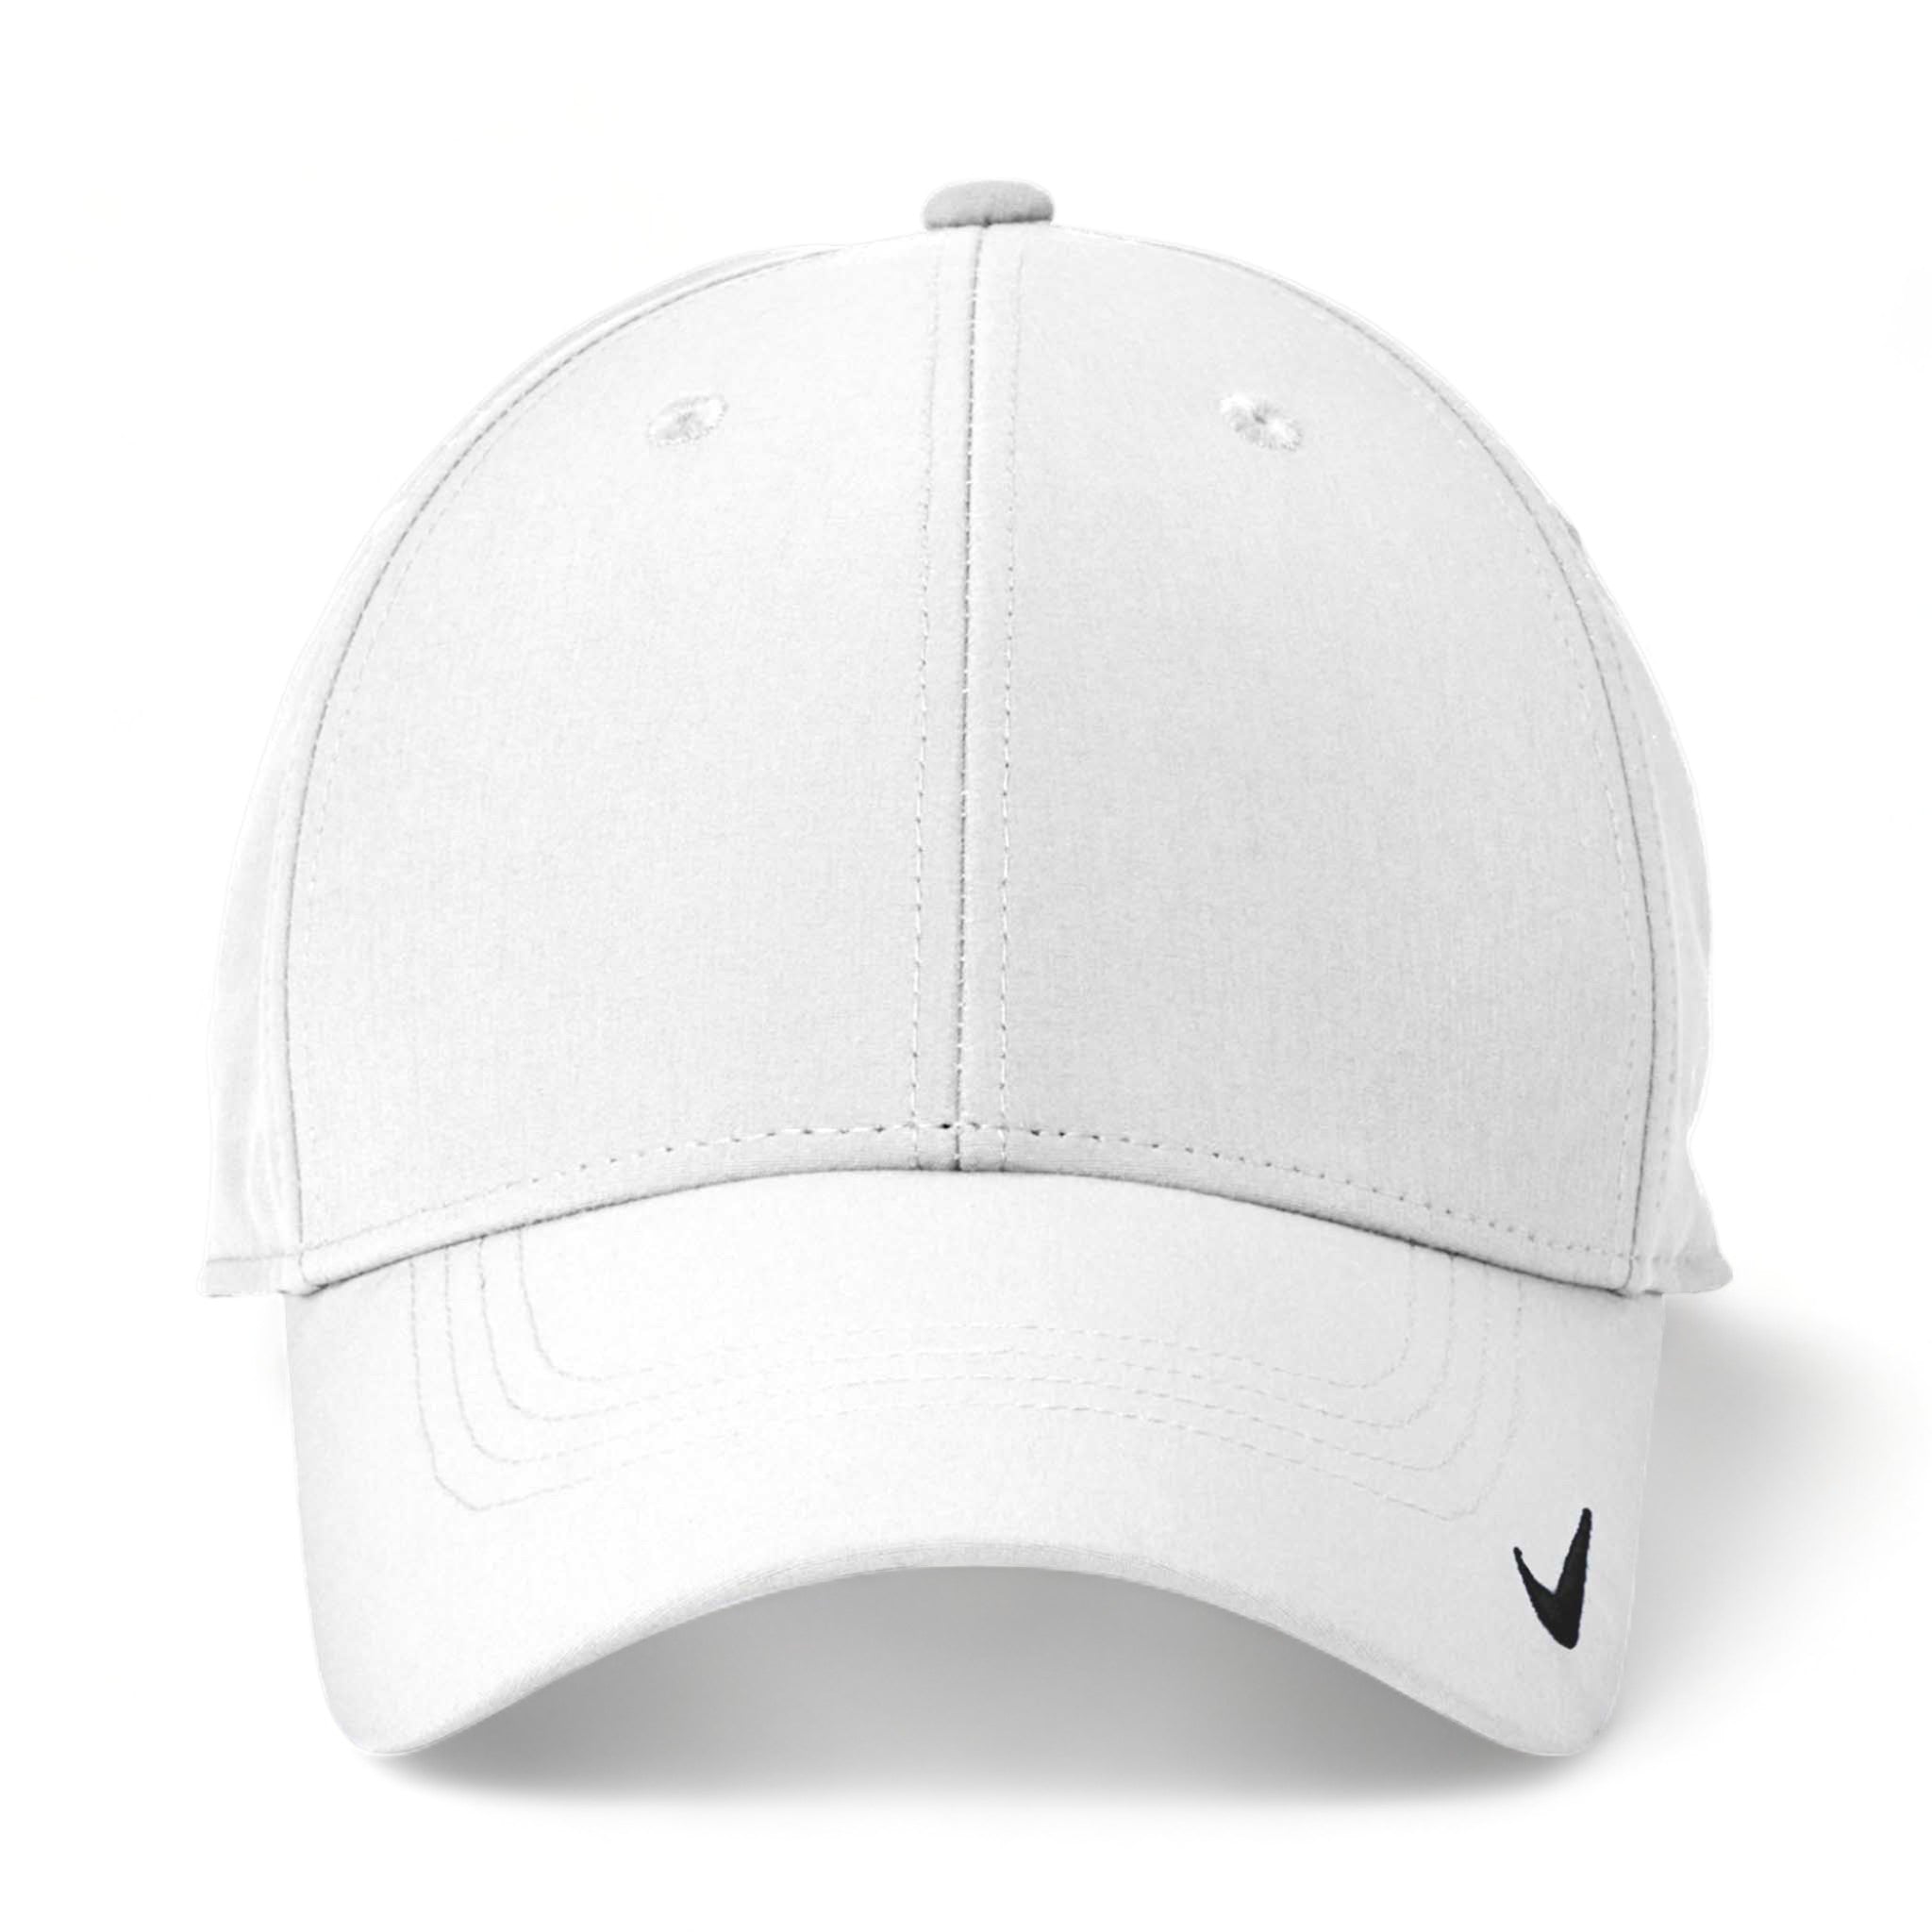 Front view of Nike NKFB6447 custom hat in white